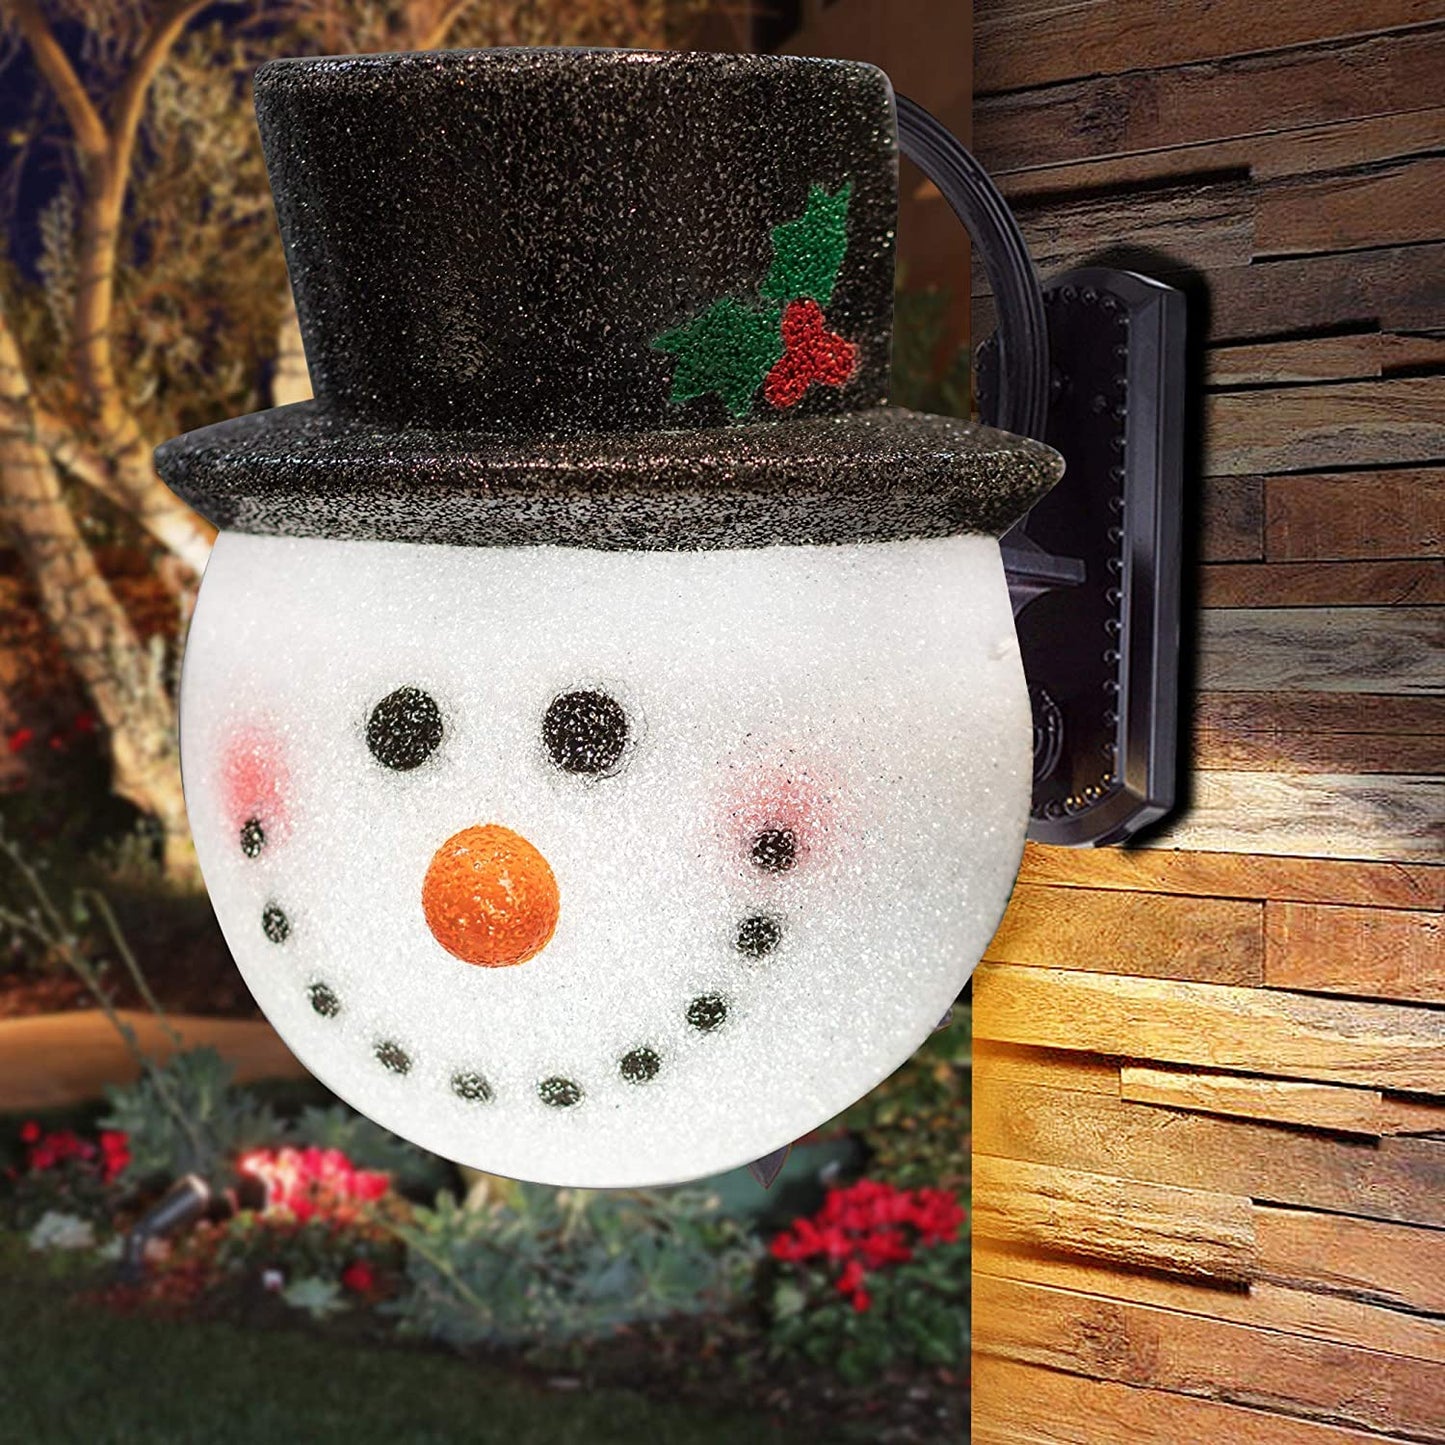 Snowman Porch Light Cover [BUY 3 FREE SHIPPING]